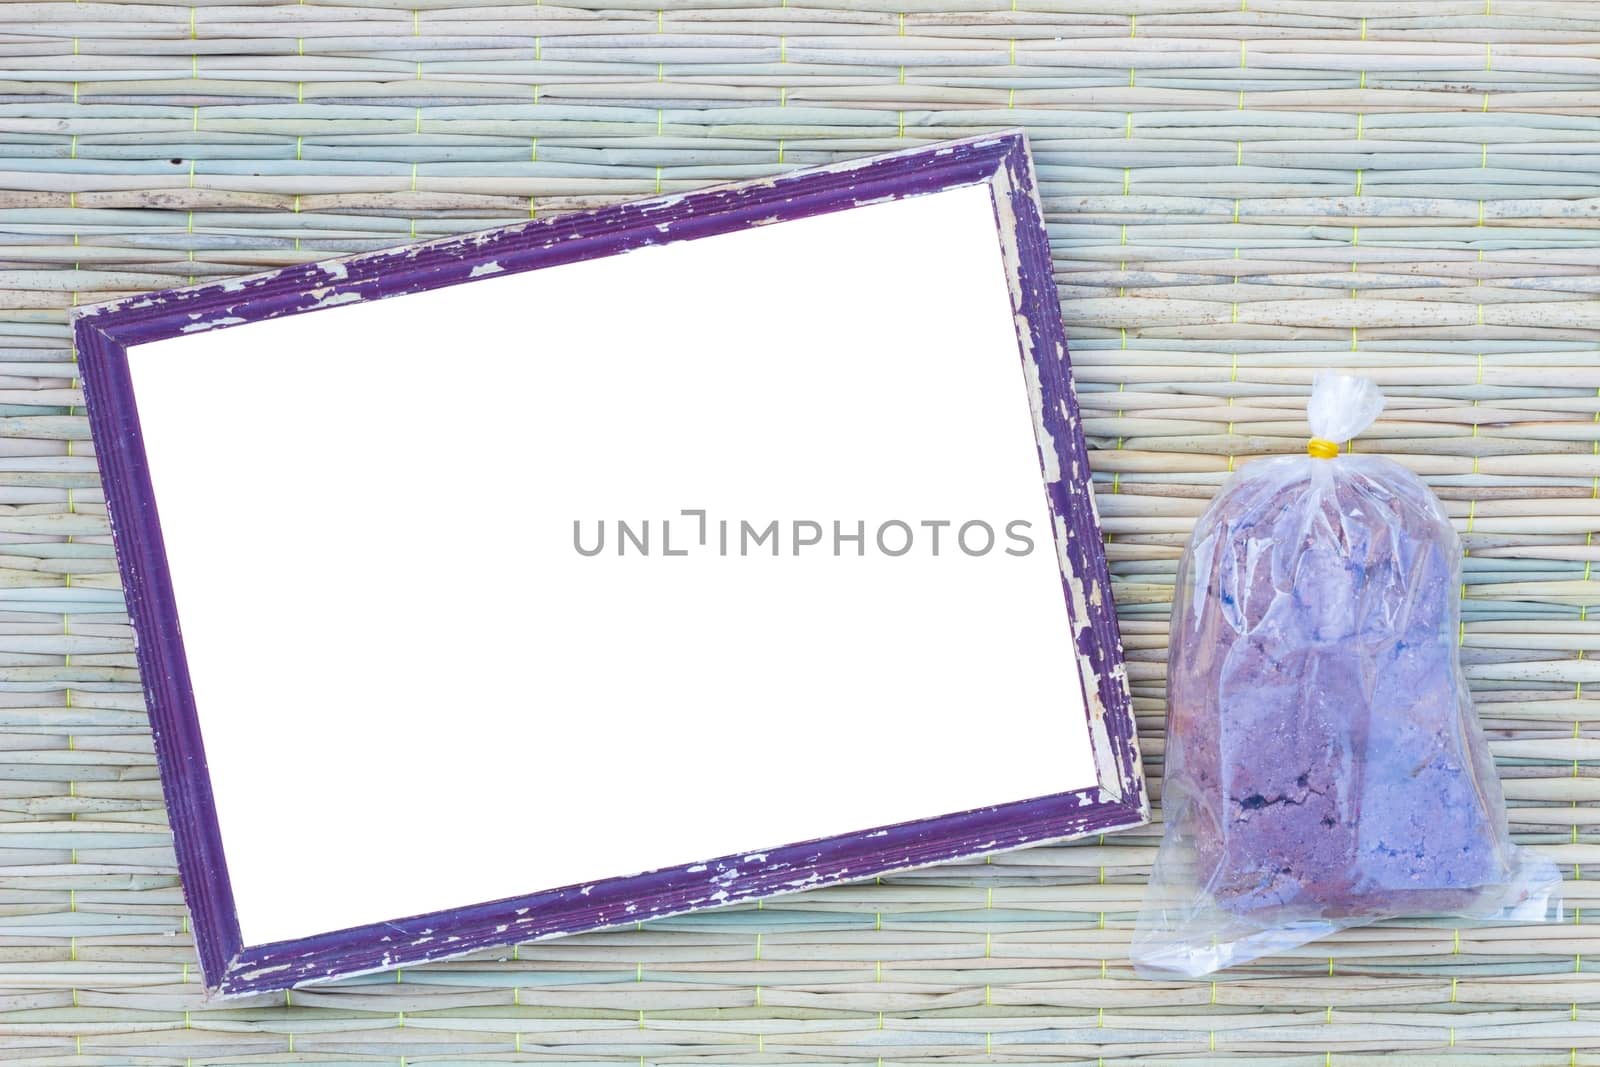 wooden old black picture frame on traditional mat with white space in the middle with shrimp paste in plastic bag